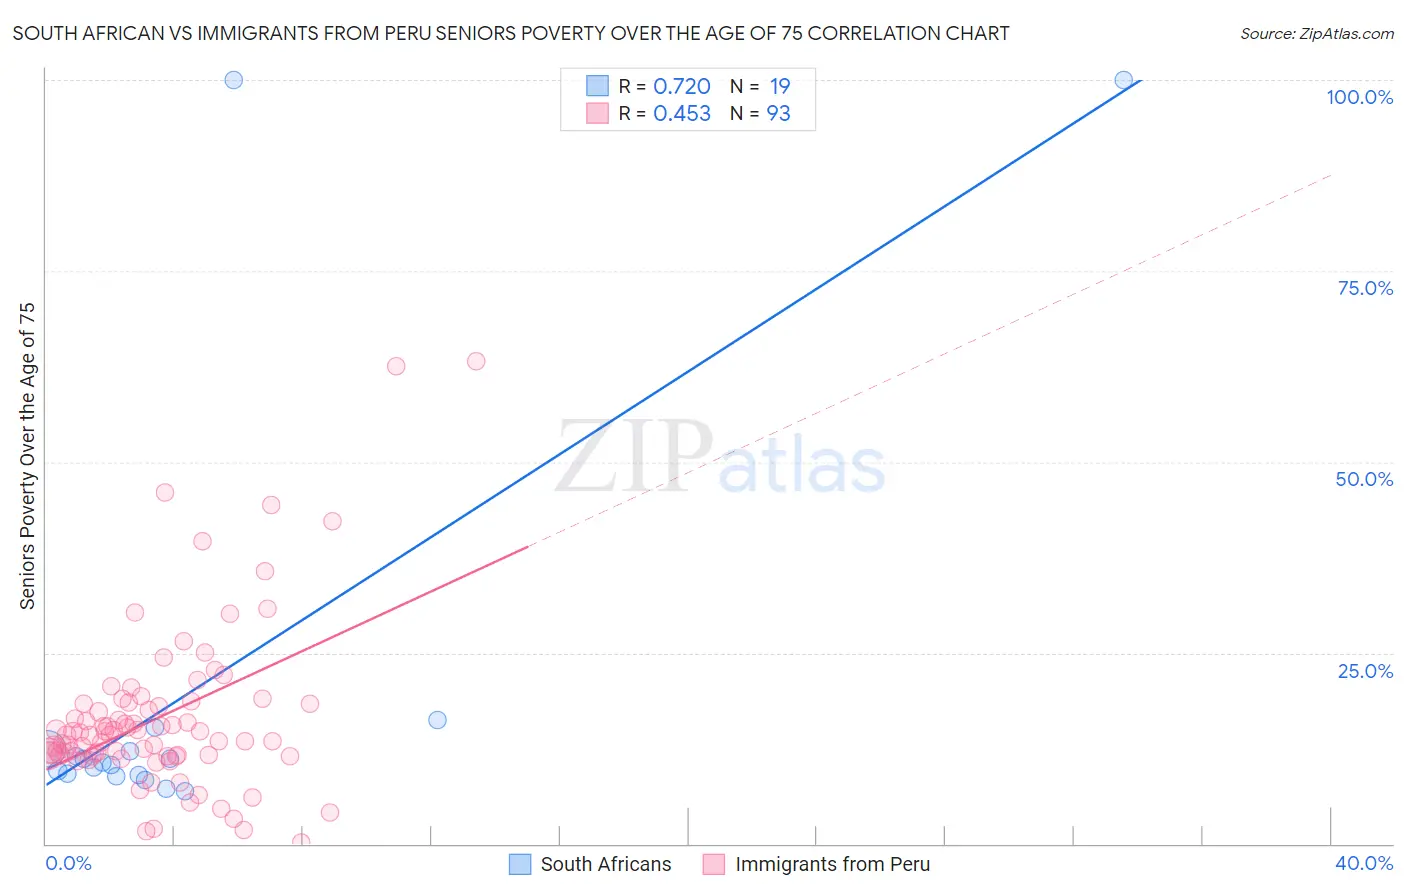 South African vs Immigrants from Peru Seniors Poverty Over the Age of 75